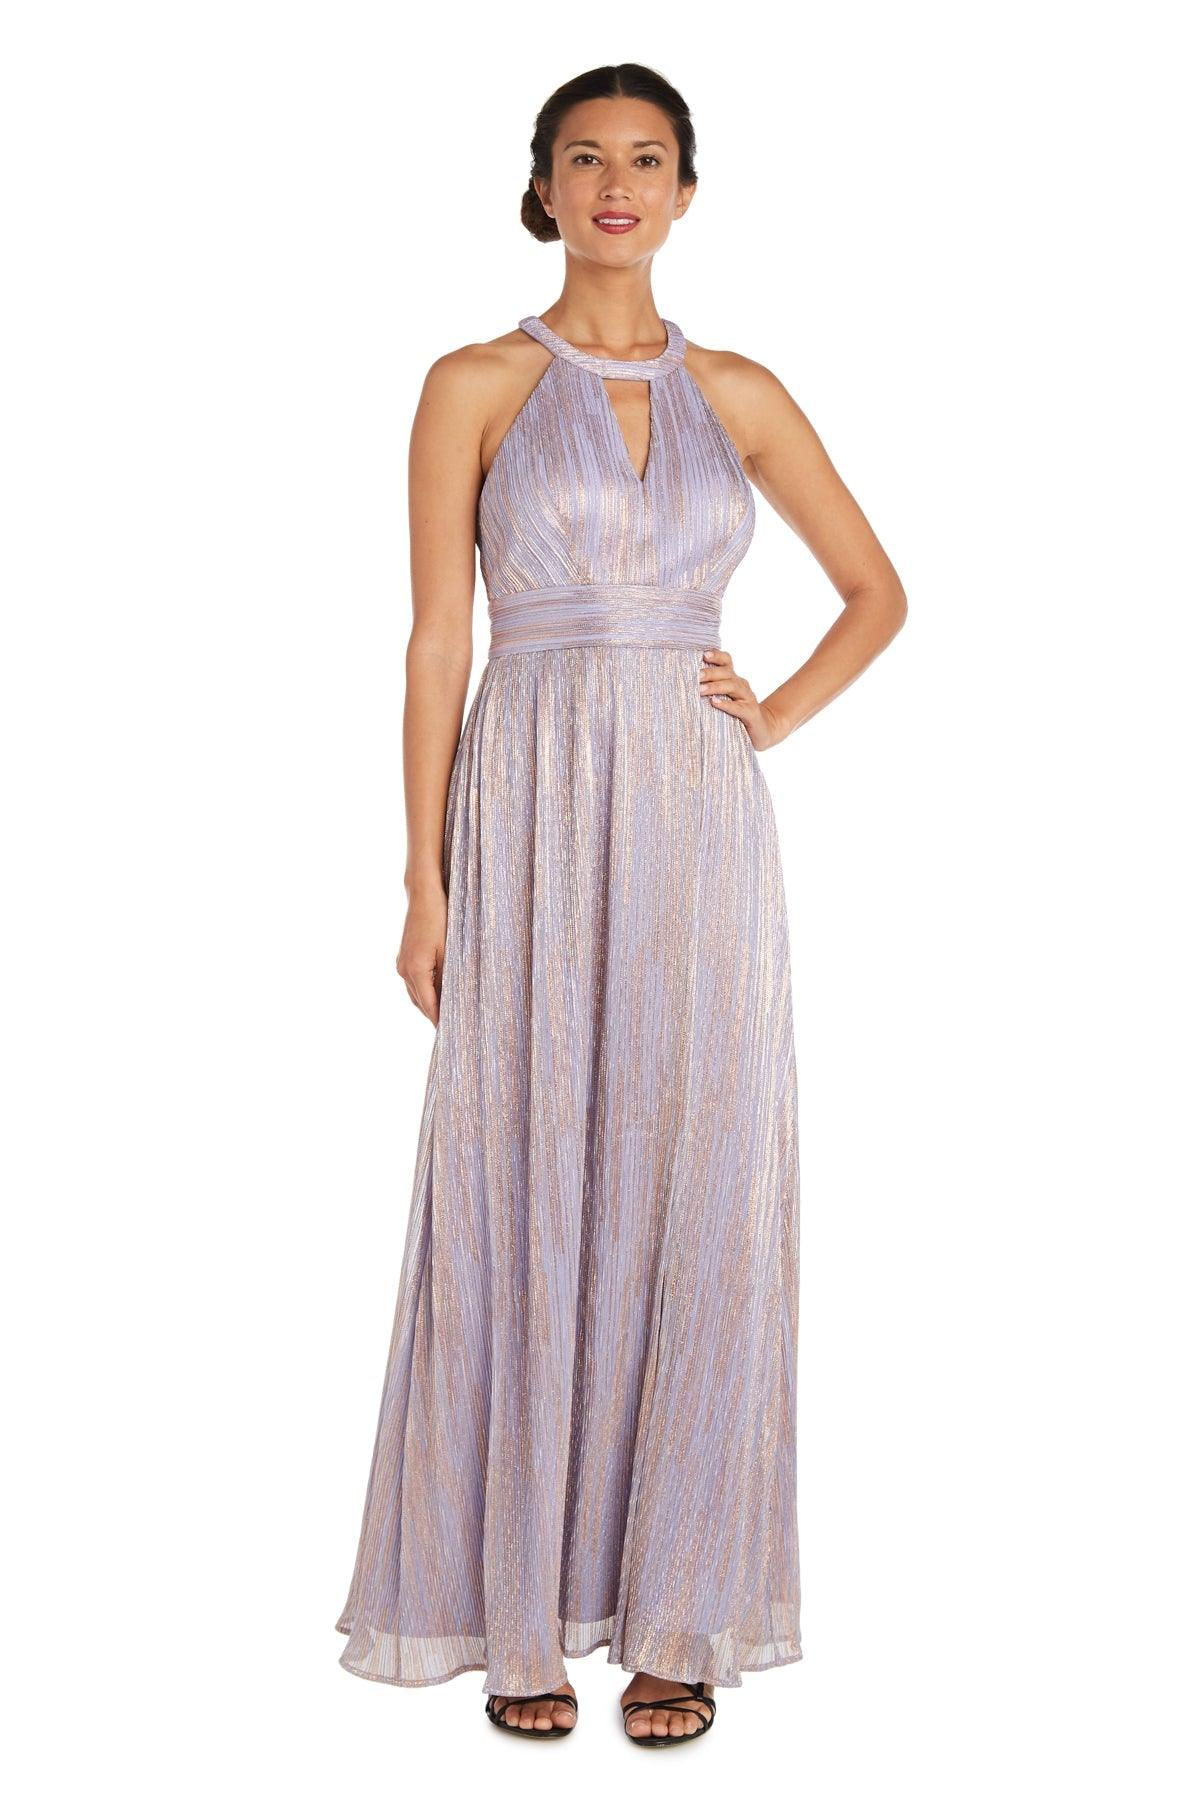 Nightway Long Formal Petite Evening Gown 22030P - The Dress Outlet